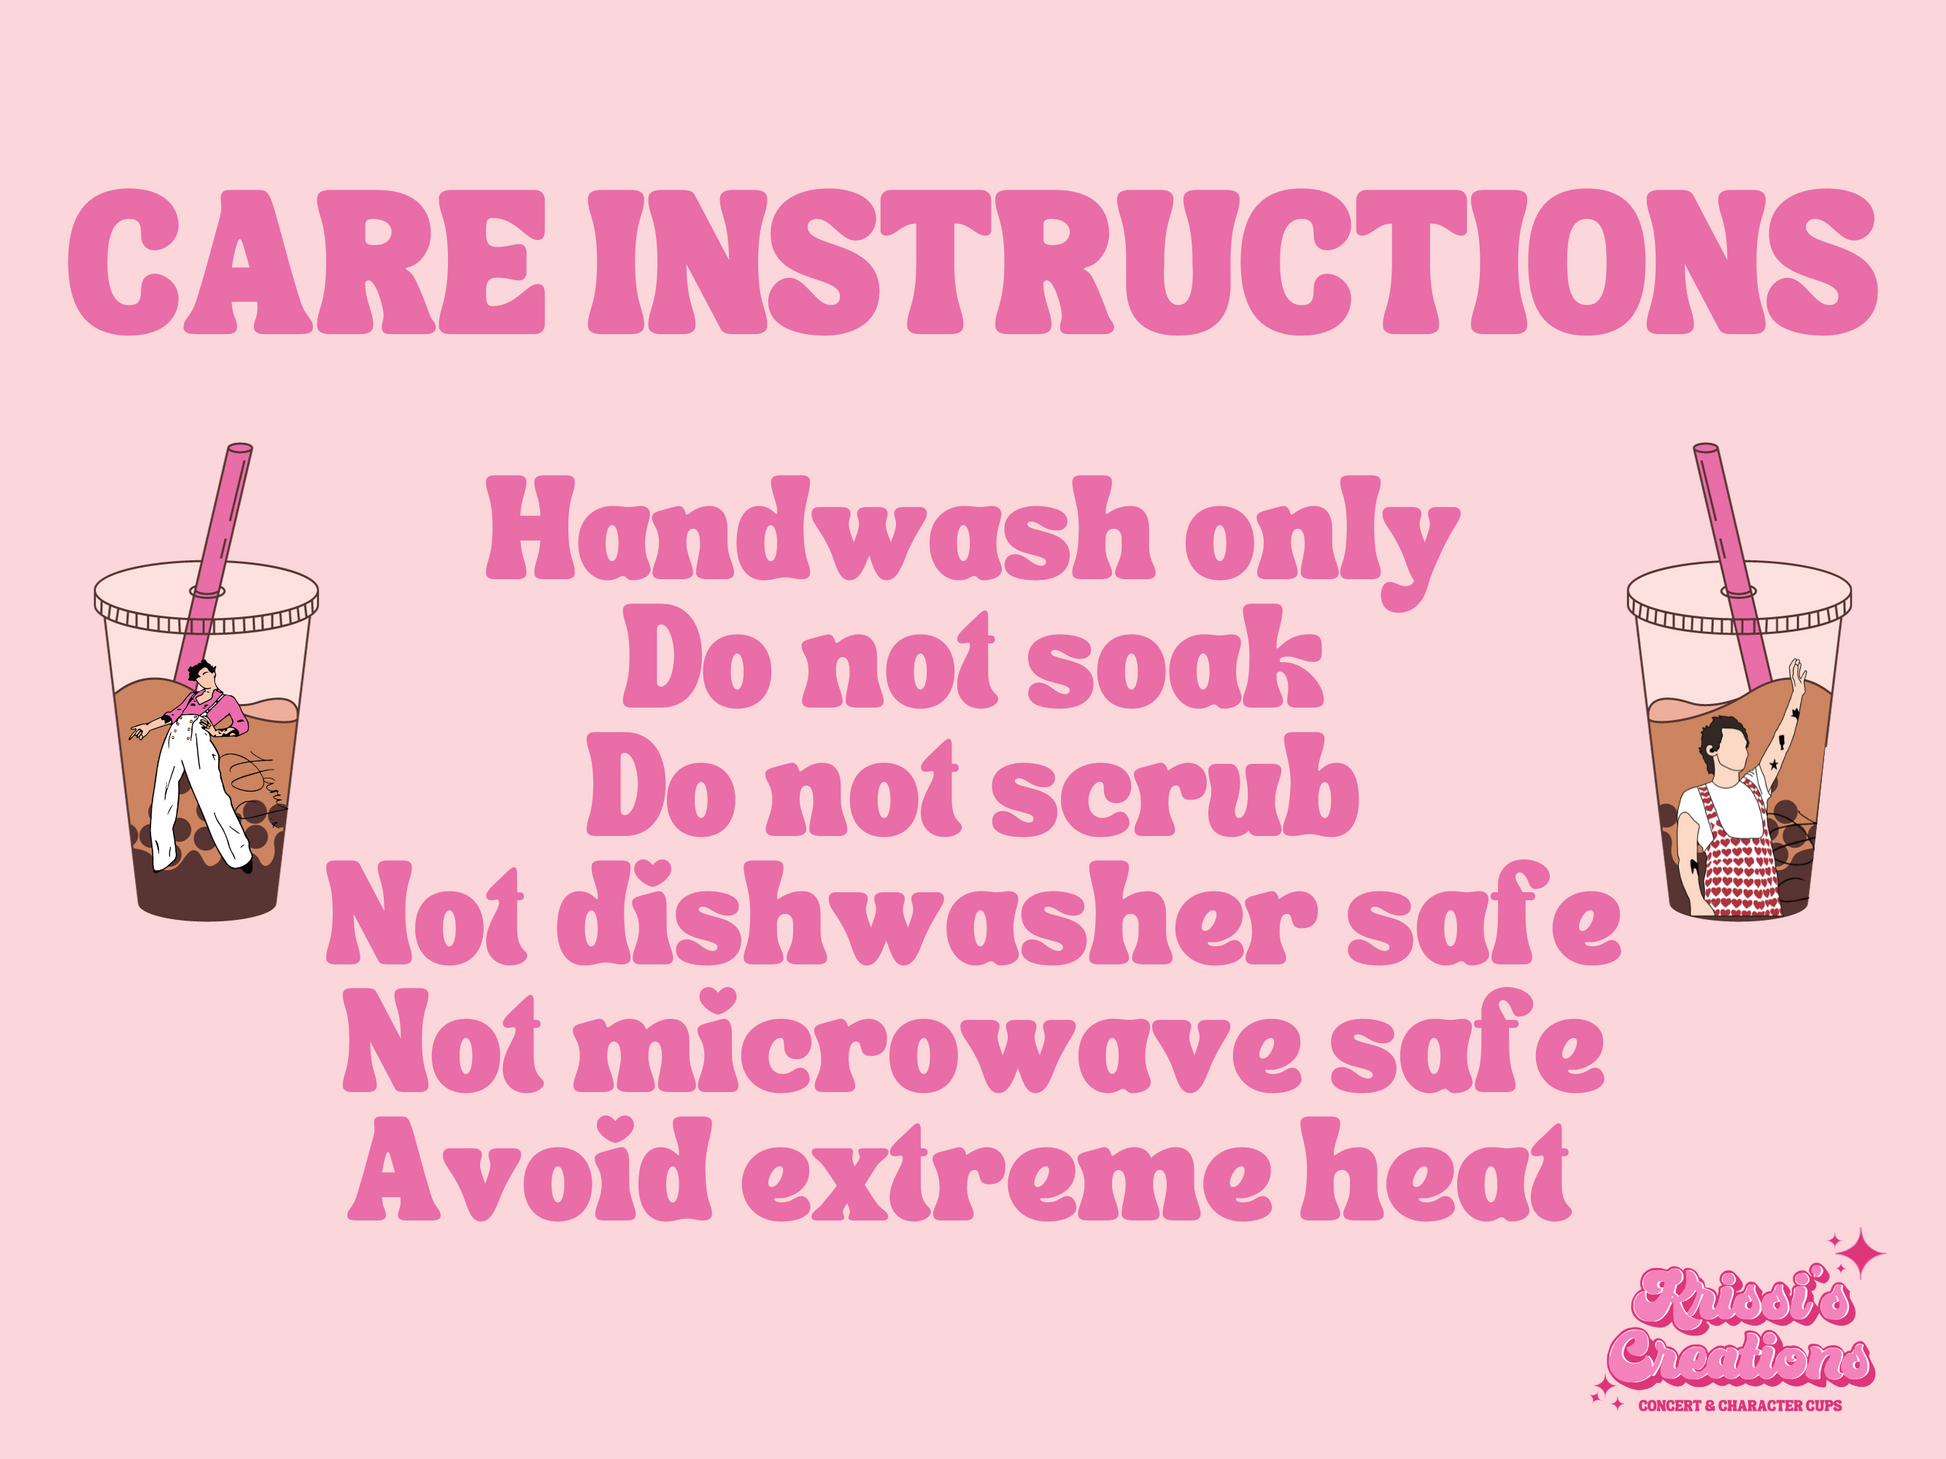 Cold Cup Care instructions / Krissi's Creations 